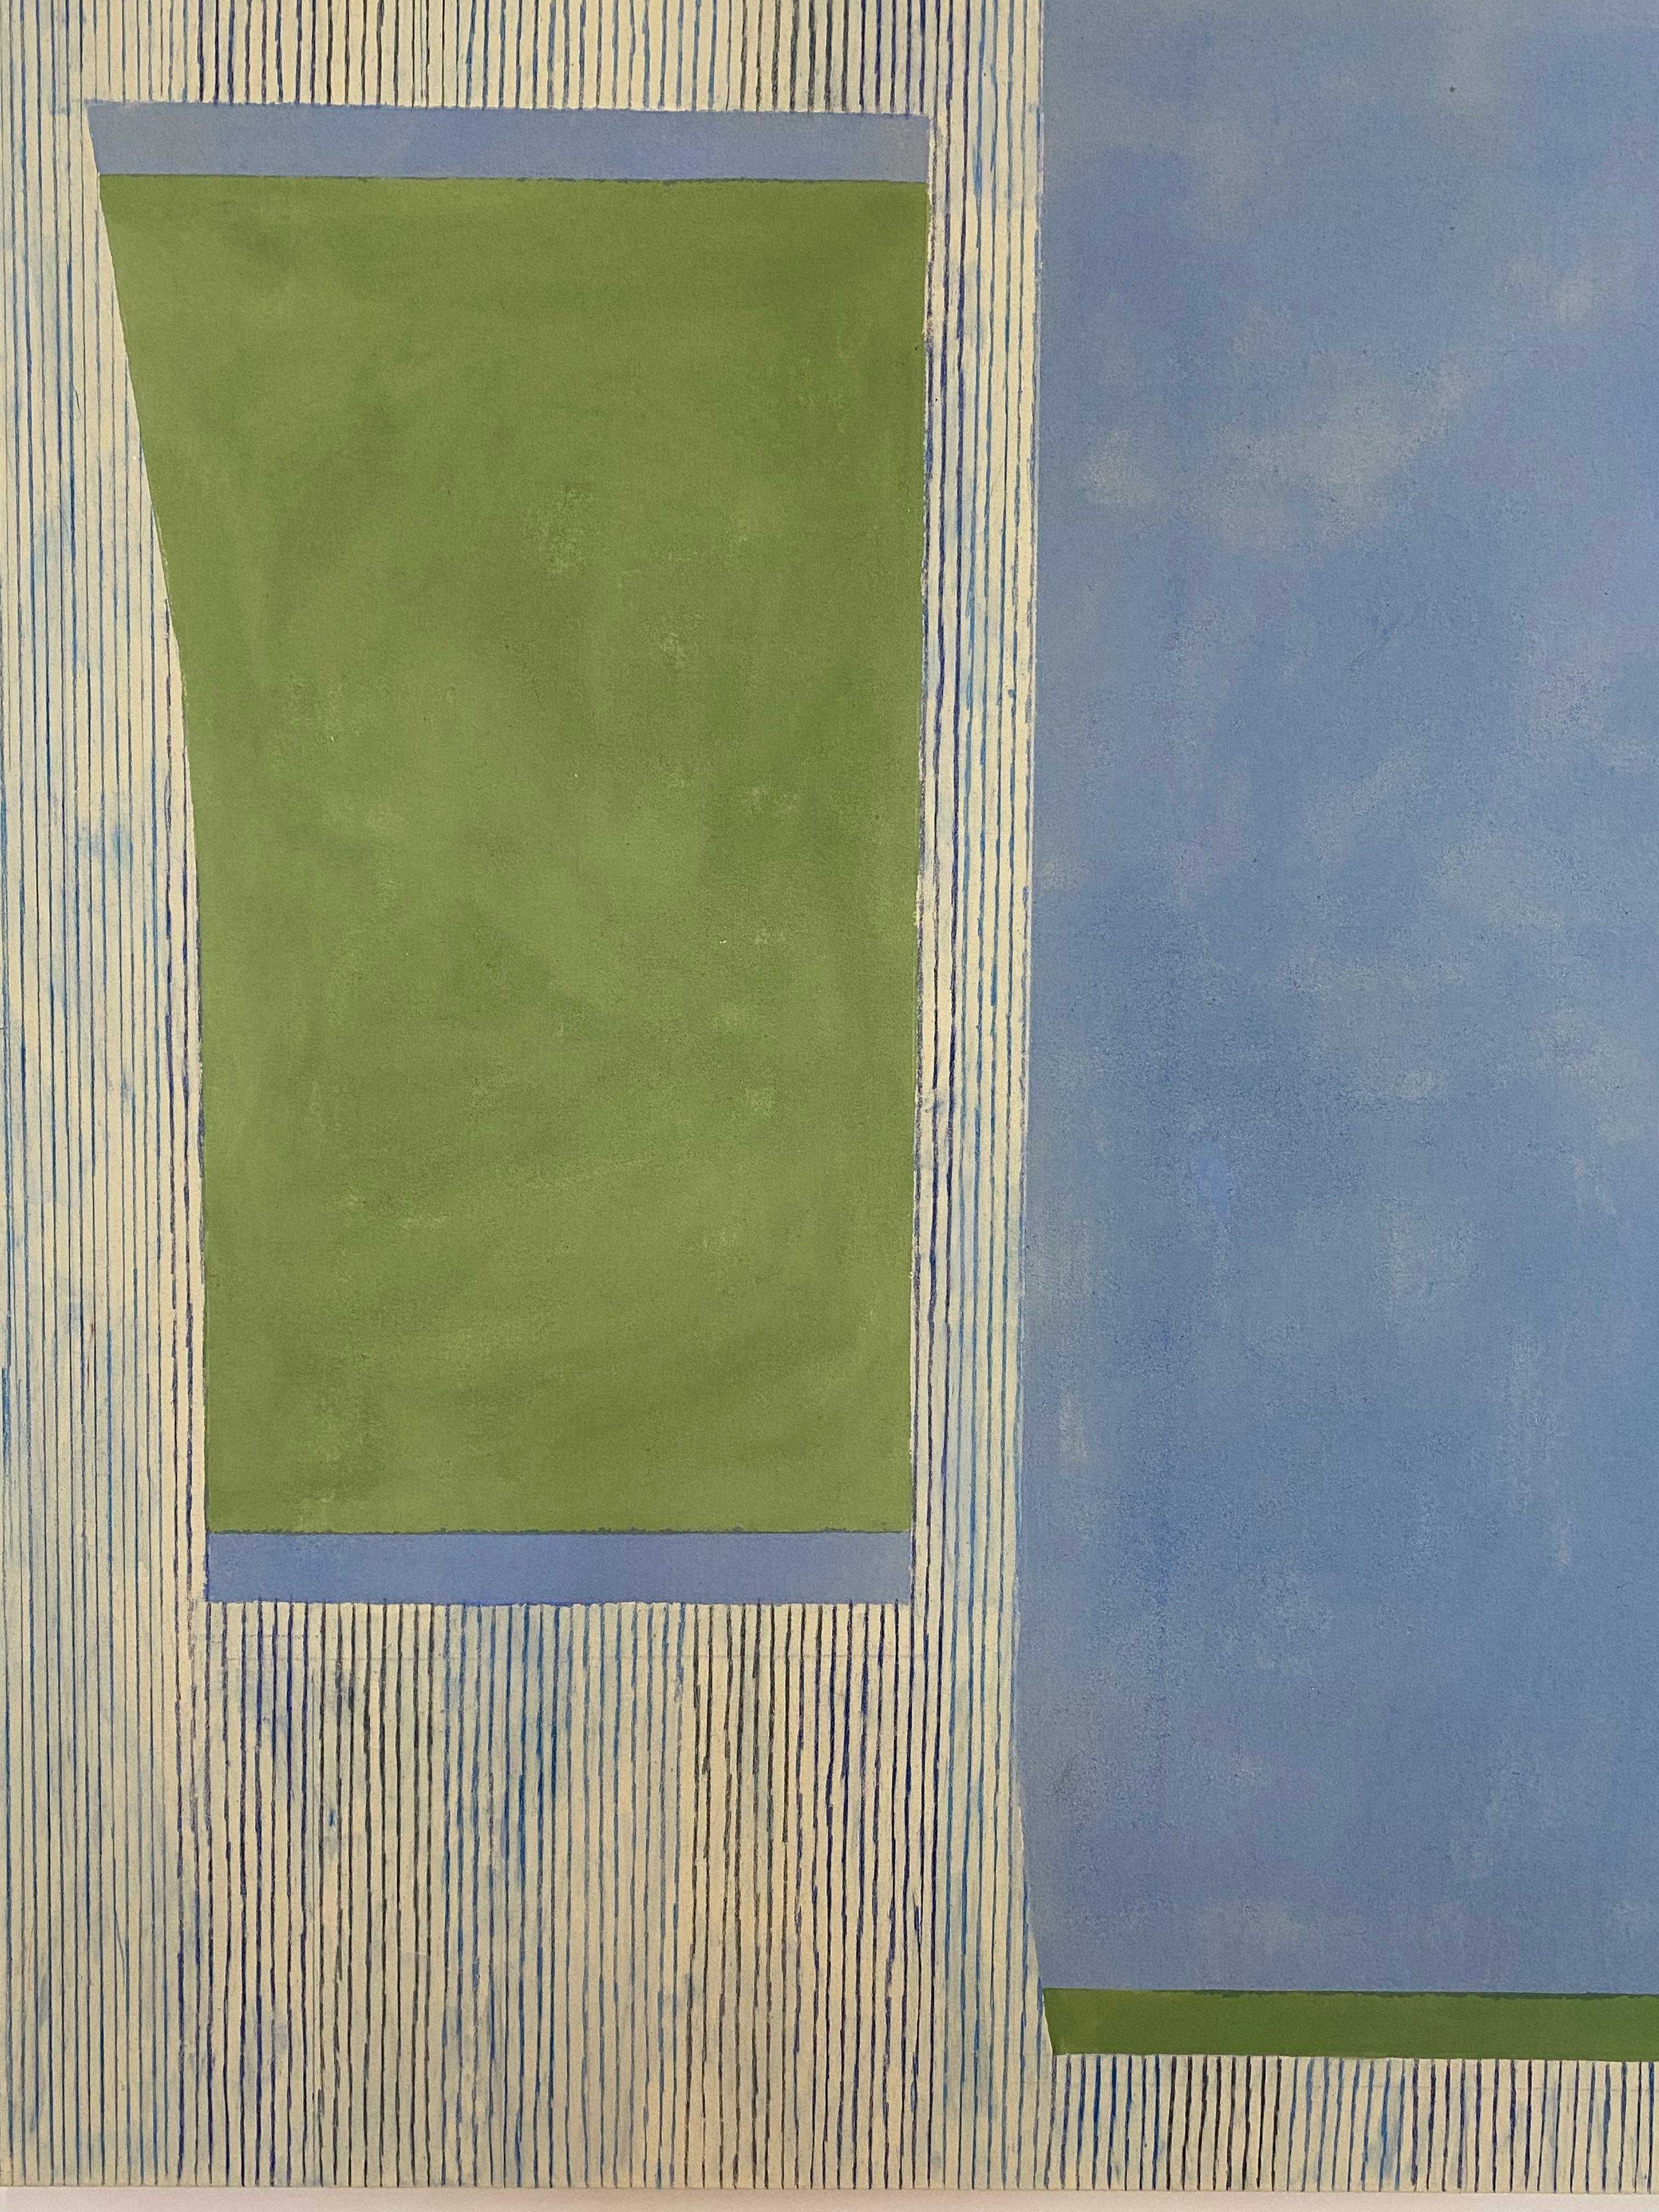 Bluecobalt Green, Light Blue, Grass Green, Stripes, Geometric Abstract Painting For Sale 4